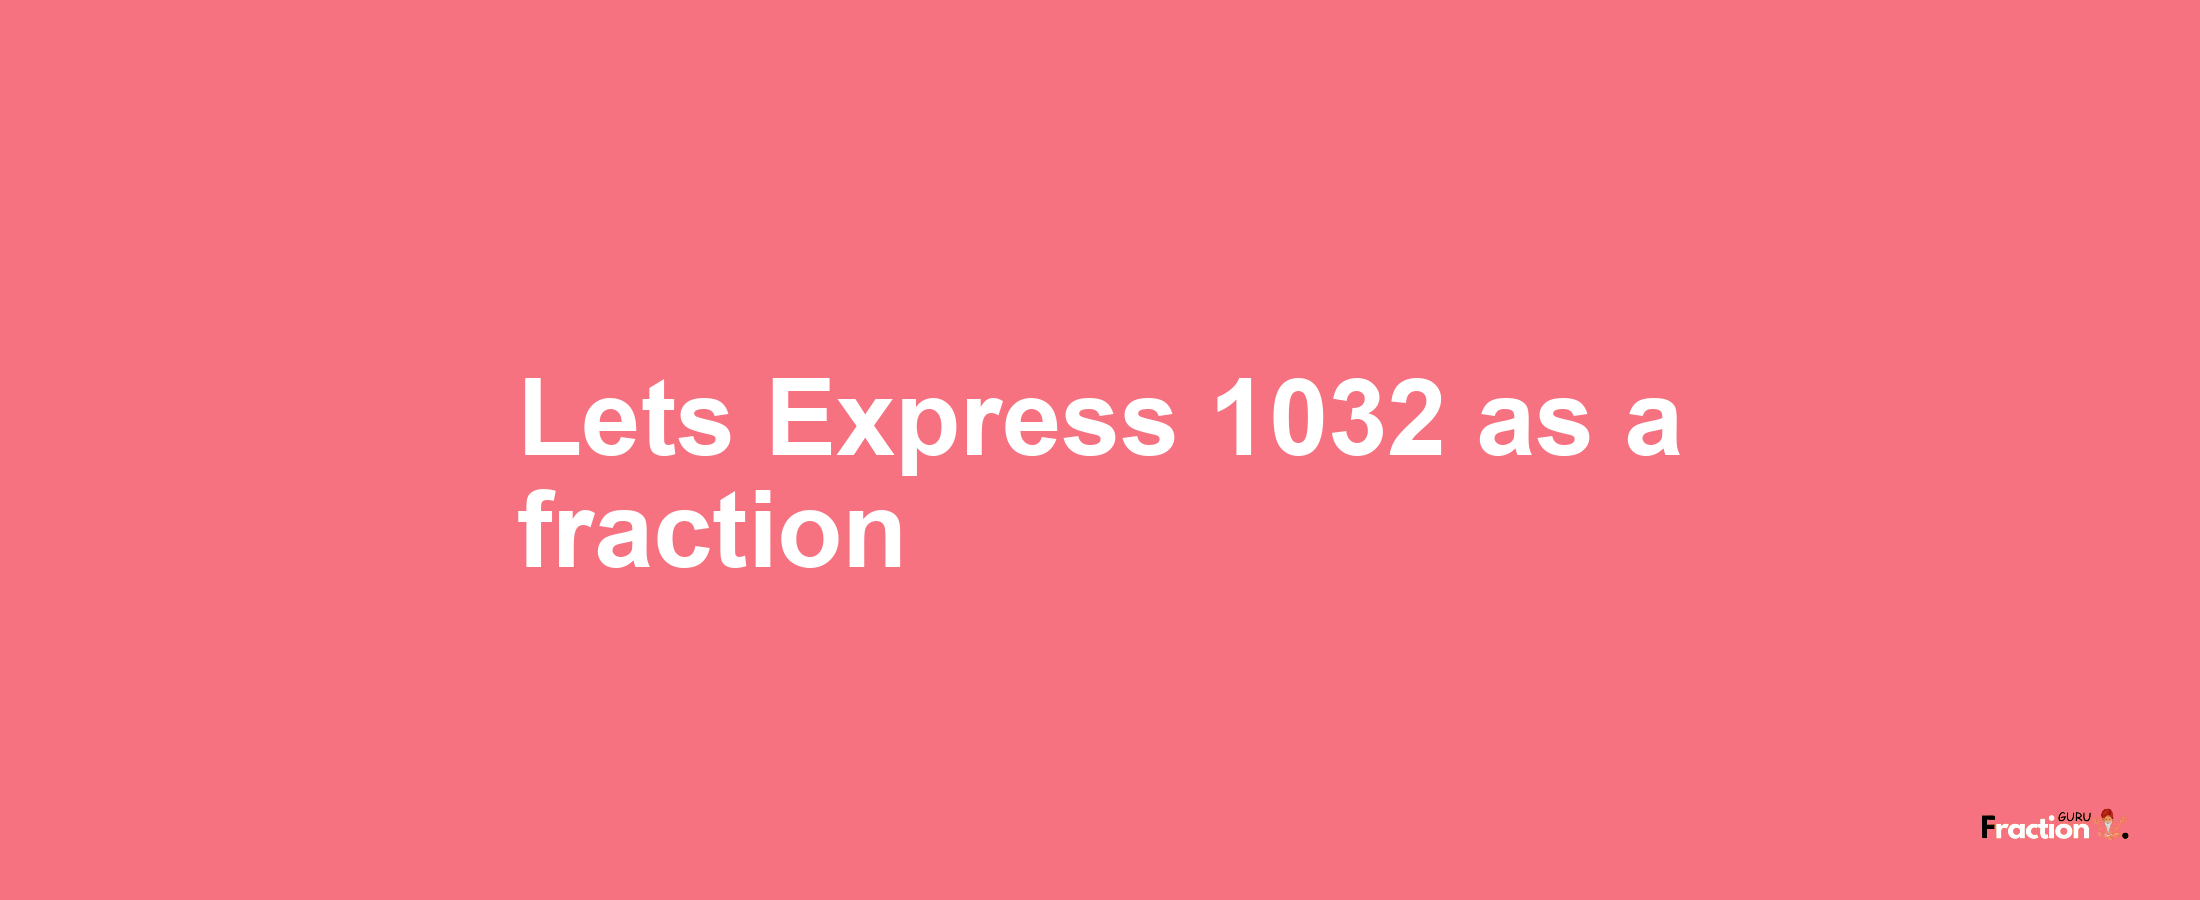 Lets Express 1032 as afraction